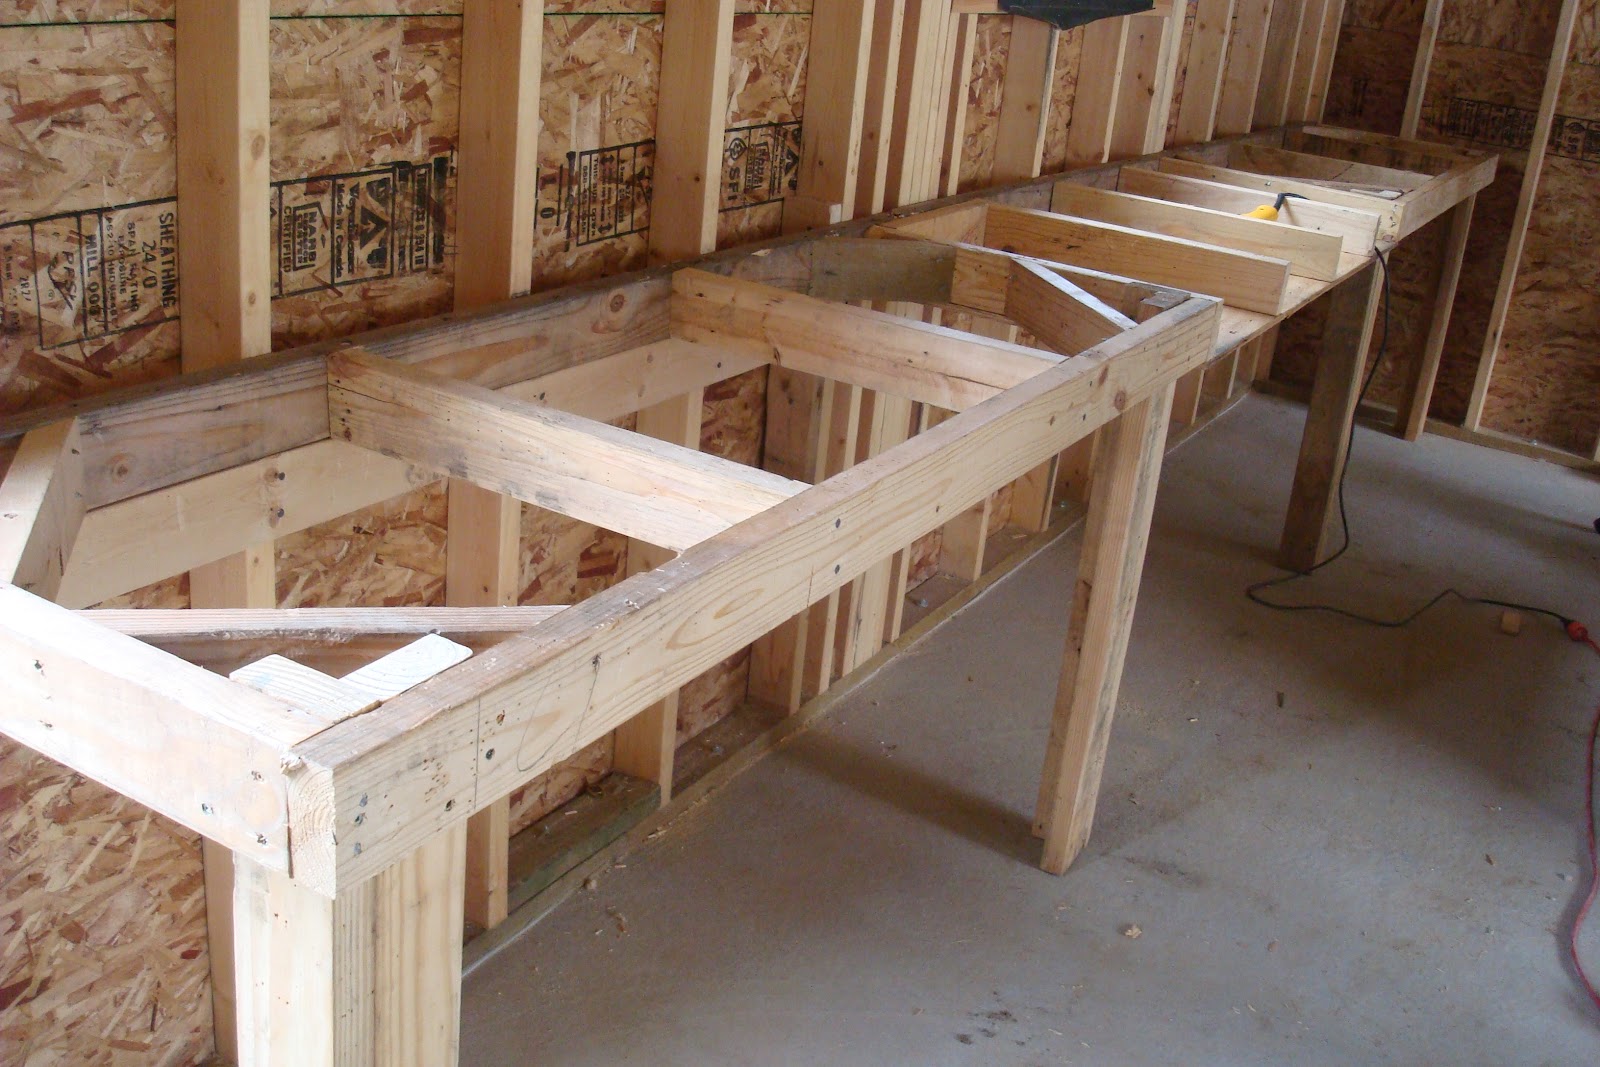  Homemade Work Bench Plans  PDF Woodworking